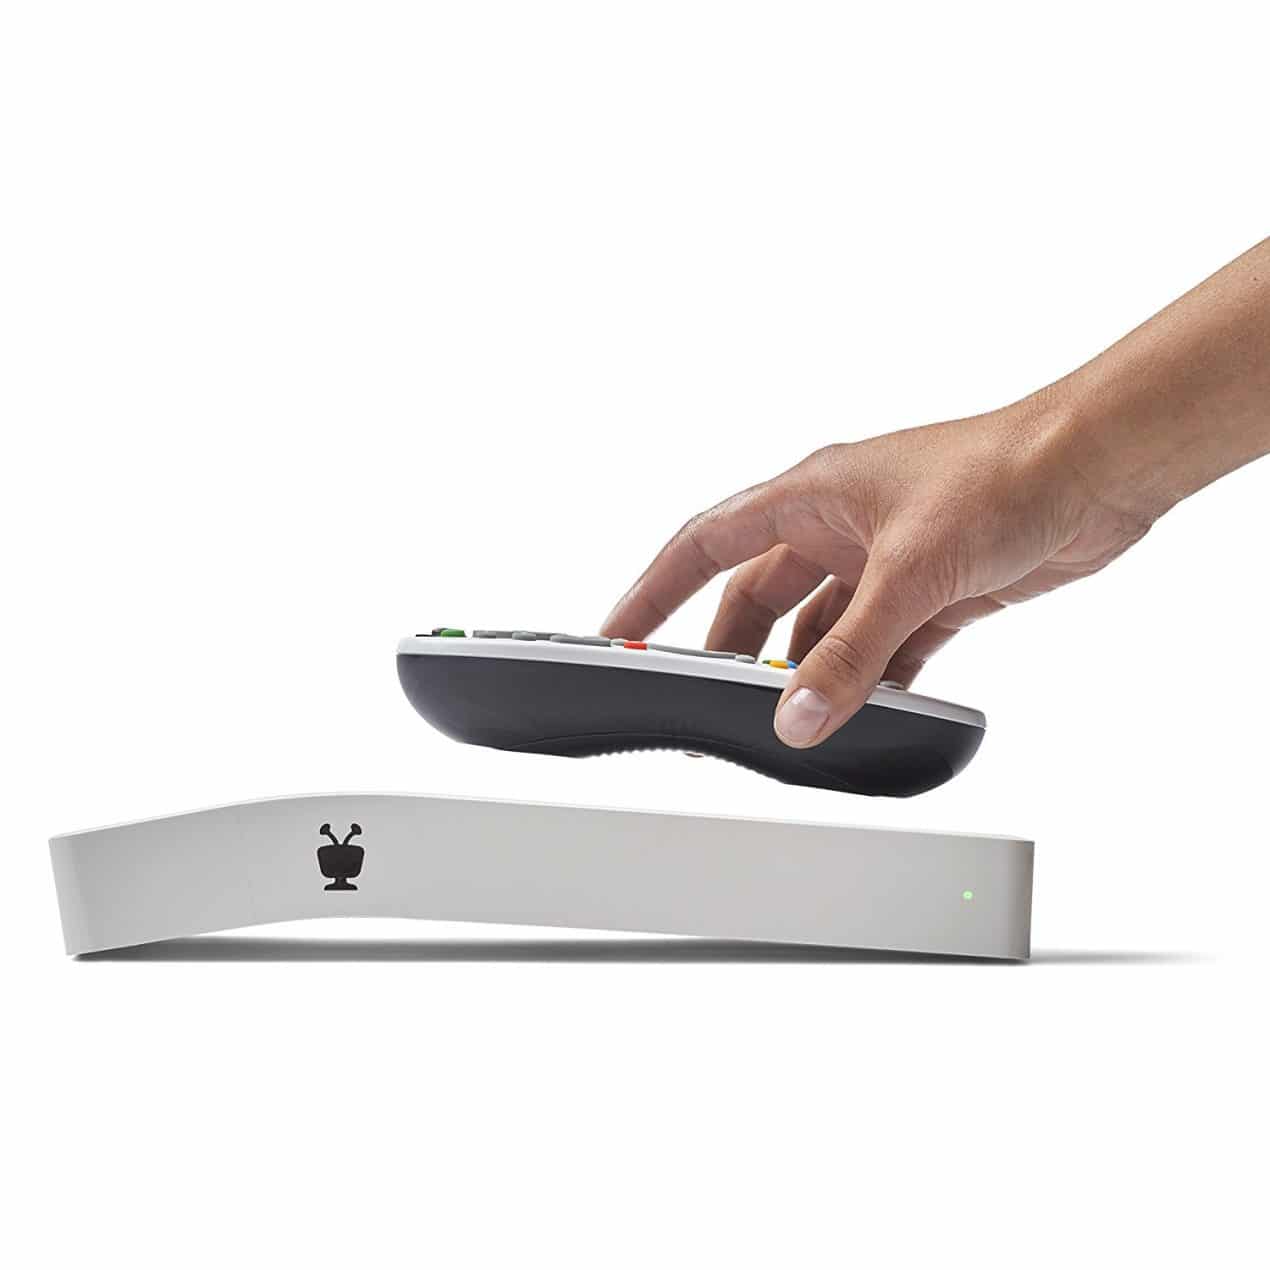 TiVo Streaming Media player with remote